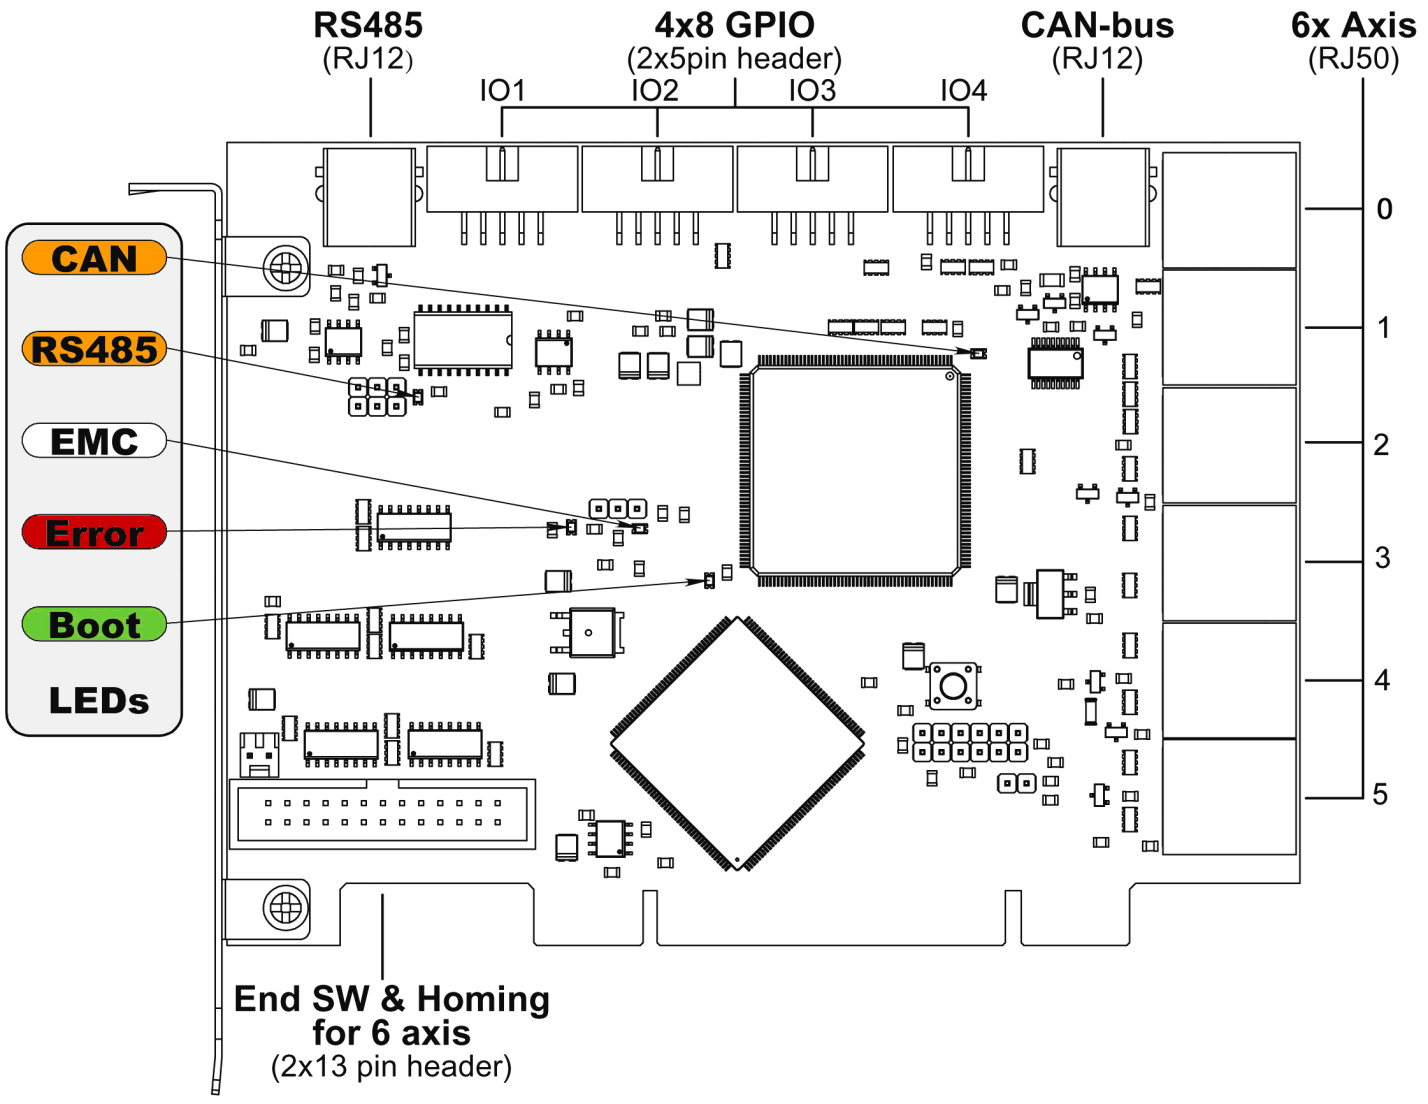 PCI card connectors and LEDs